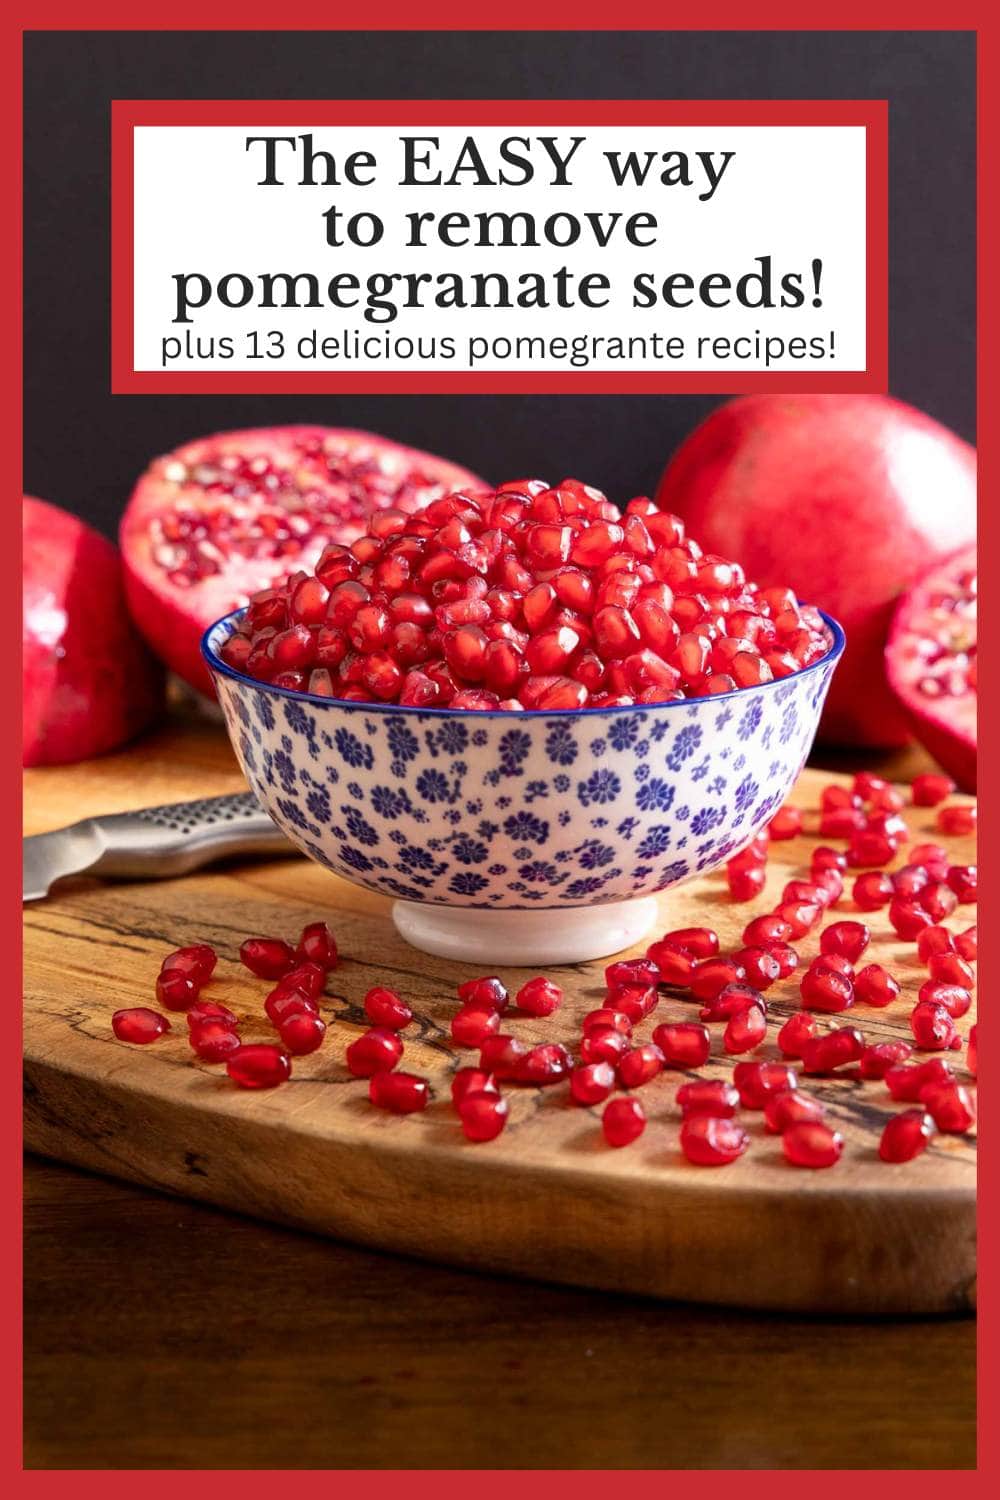 The Easy Way to Remove Pomegranate Seeds and 13 Beautiful, Delicious Ways to Use Them